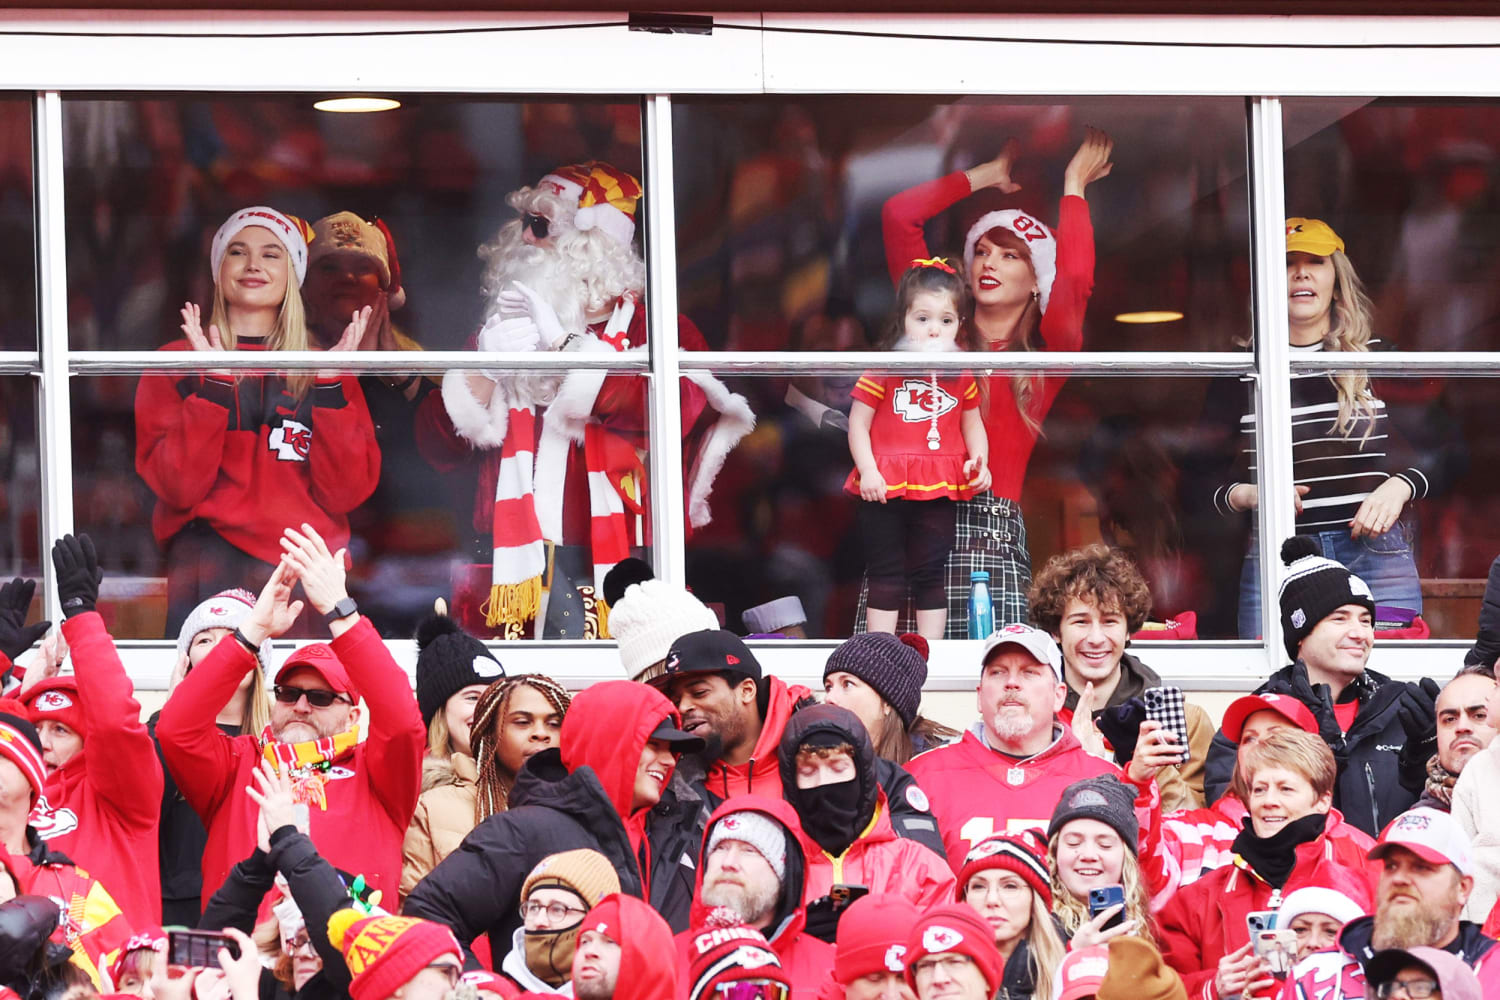 Things are getting serious' Taylor Swift buys a suite at Arrowhead